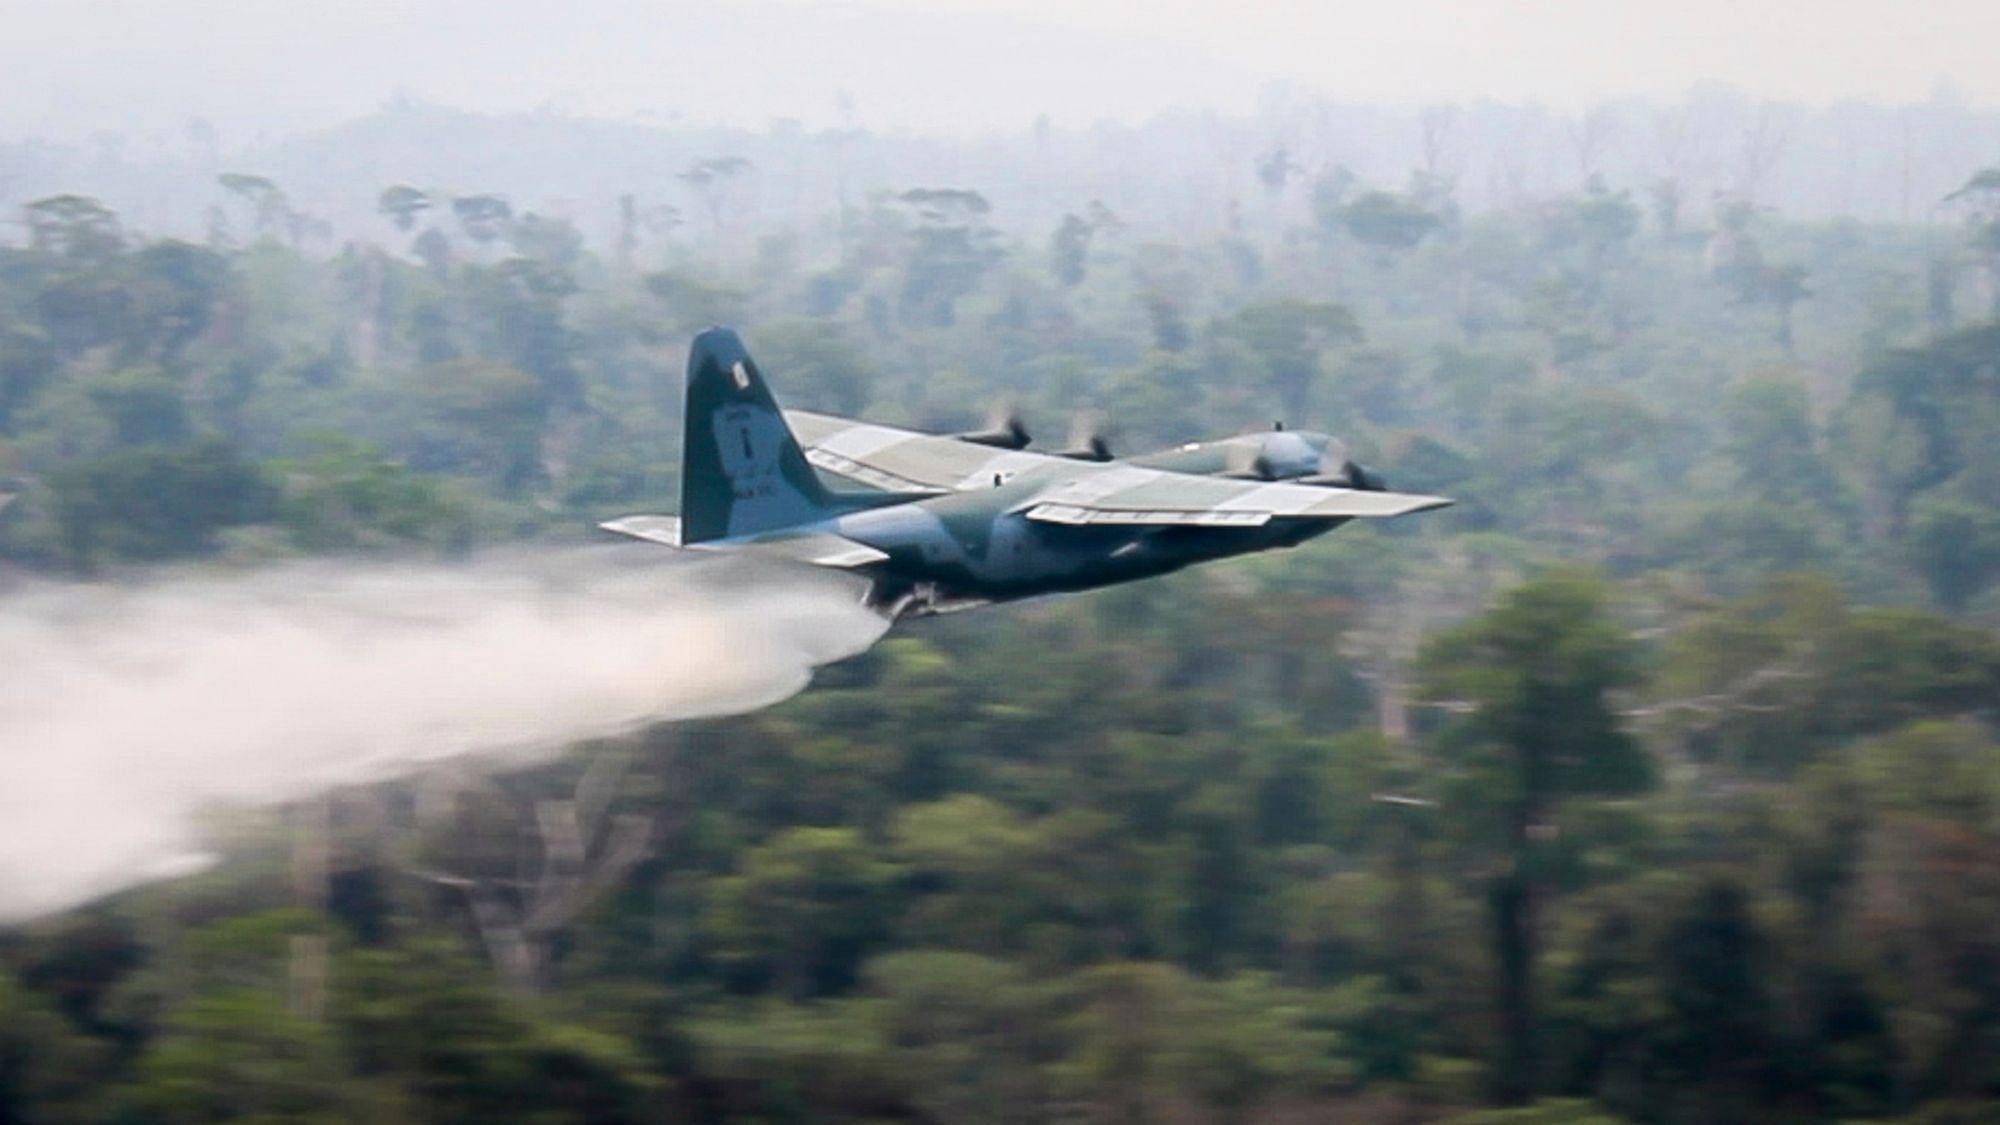 In this photo released by Brazil Ministry of Defense, a C-130 Hercules aircraft dumps water to fight fires burning in the Amazon rainforest, in Brazil.